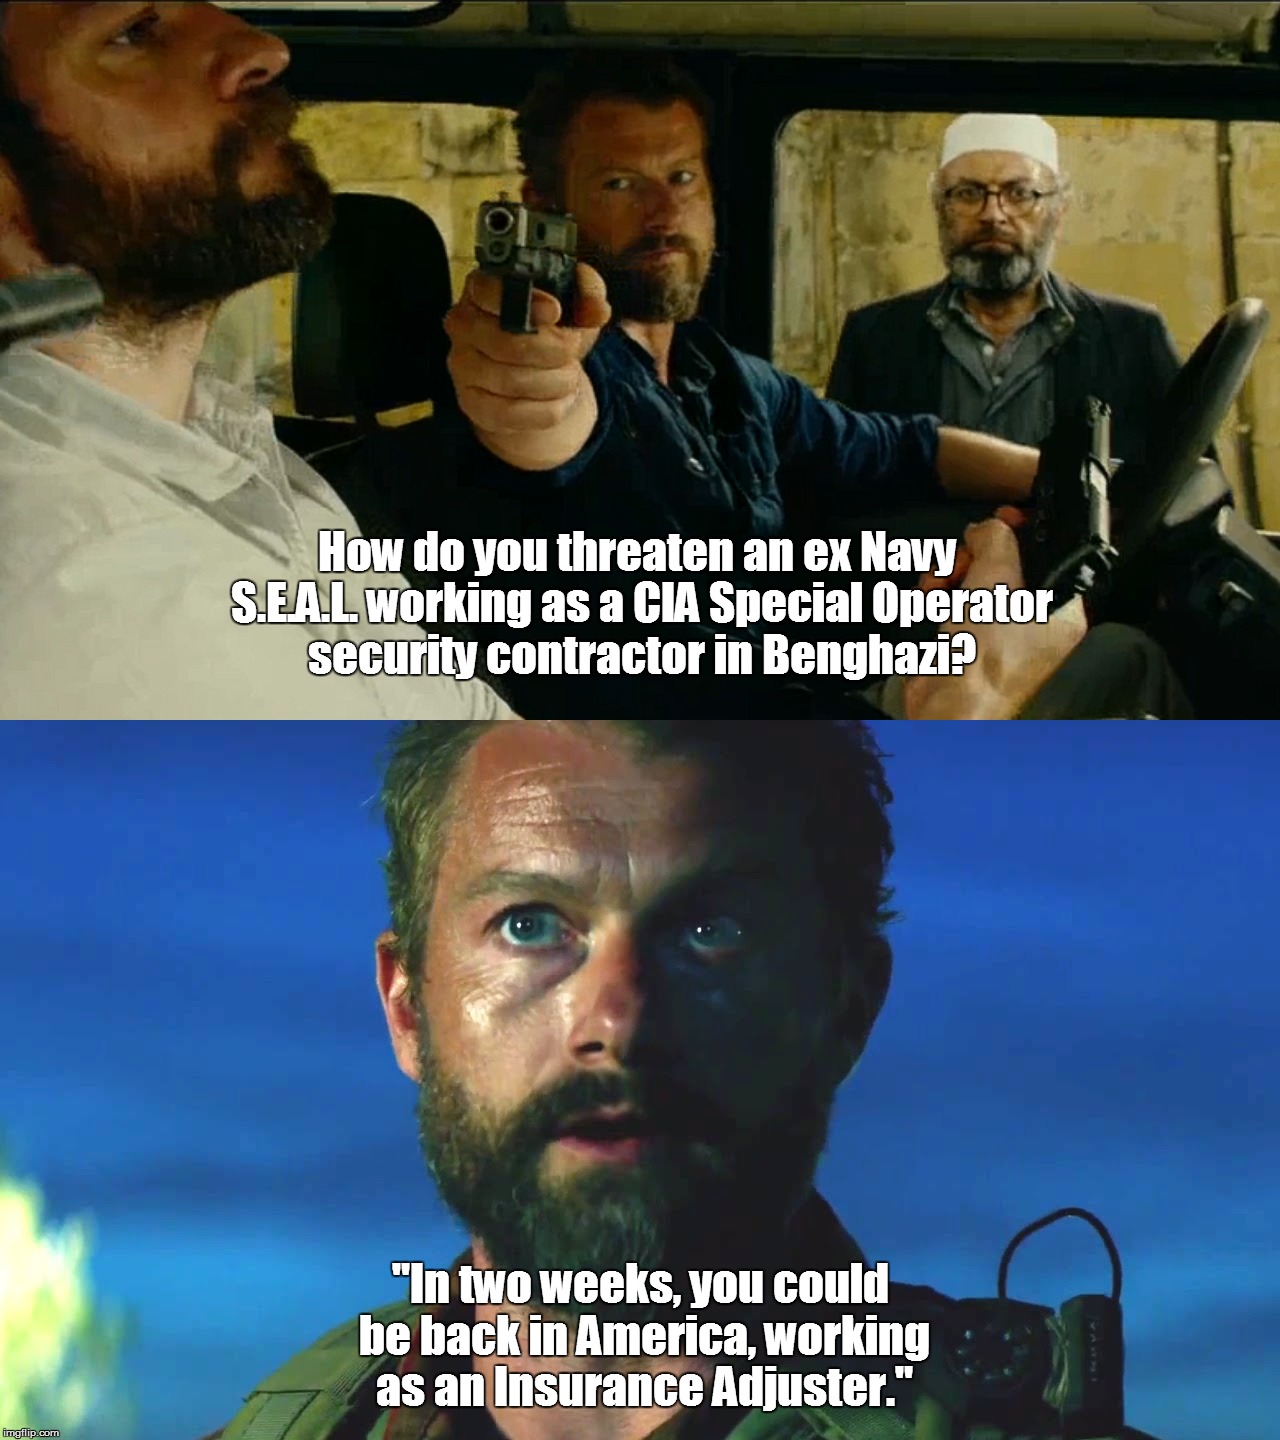 Home of the Brave? | How do you threaten an ex Navy S.E.A.L. working as a CIA Special Operator security contractor in Benghazi? "In two weeks, you could be back in America, working as an Insurance Adjuster." | image tagged in 13 hours,benghazi,insurance,adjuster | made w/ Imgflip meme maker